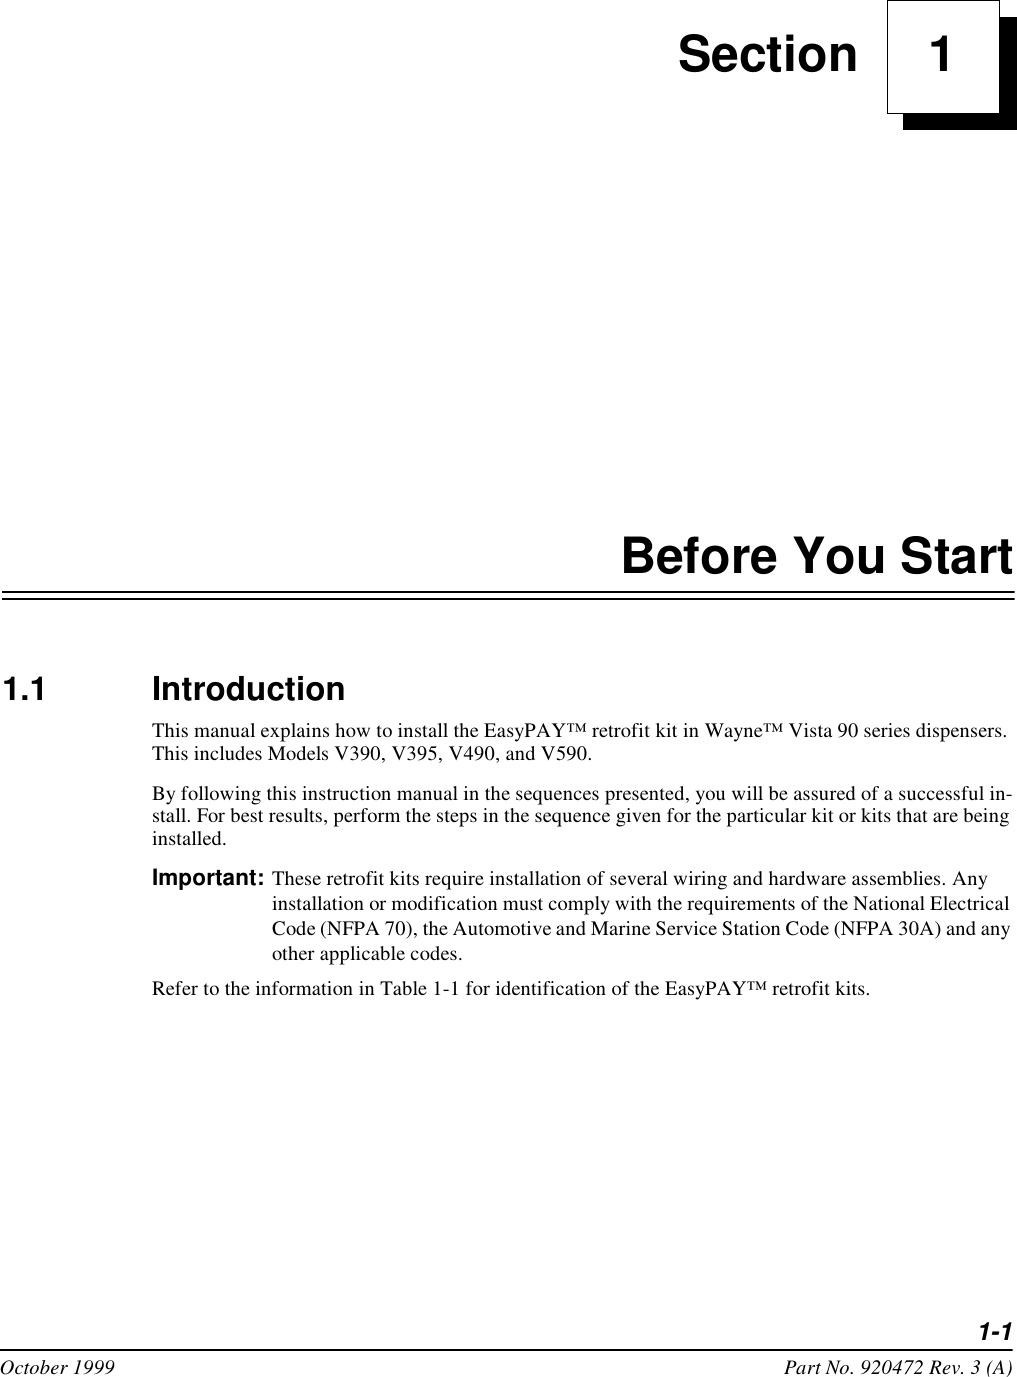 1-1October 1999 Part No. 920472 Rev. 3 (A) Section     1Before You Start1.1 IntroductionThis manual explains how to install the EasyPAY™ retrofit kit in Wayne™ Vista 90 series dispensers. This includes Models V390, V395, V490, and V590. By following this instruction manual in the sequences presented, you will be assured of a successful in-stall. For best results, perform the steps in the sequence given for the particular kit or kits that are being installed. Important: These retrofit kits require installation of several wiring and hardware assemblies. Any installation or modification must comply with the requirements of the National Electrical Code (NFPA 70), the Automotive and Marine Service Station Code (NFPA 30A) and any other applicable codes. Refer to the information in Table 1-1 for identification of the EasyPAY™ retrofit kits. 